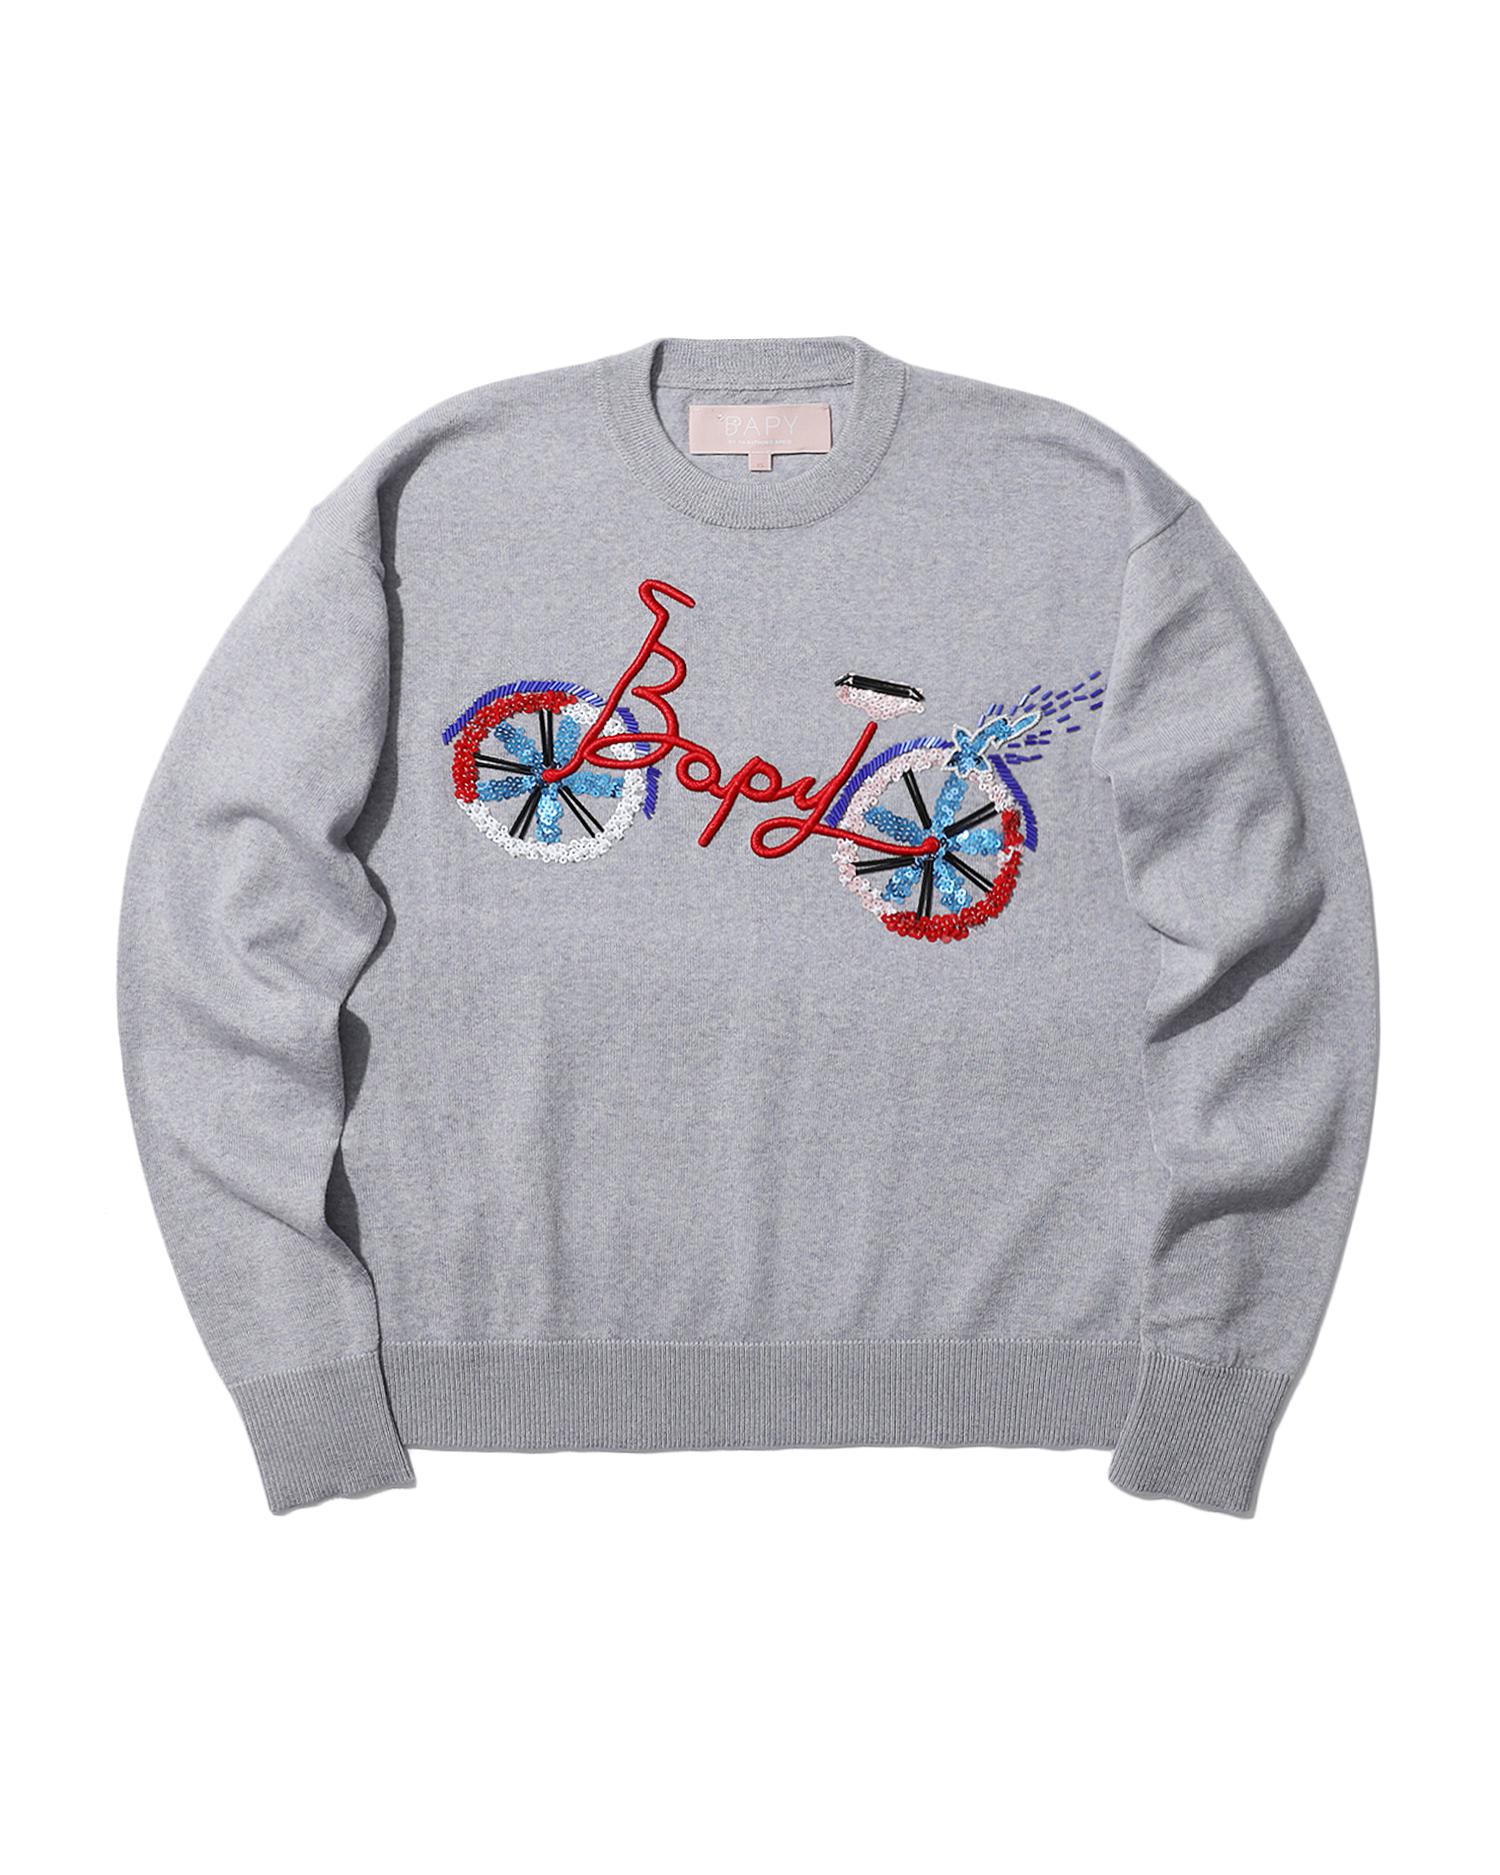 Bicycle sweater by BAPY